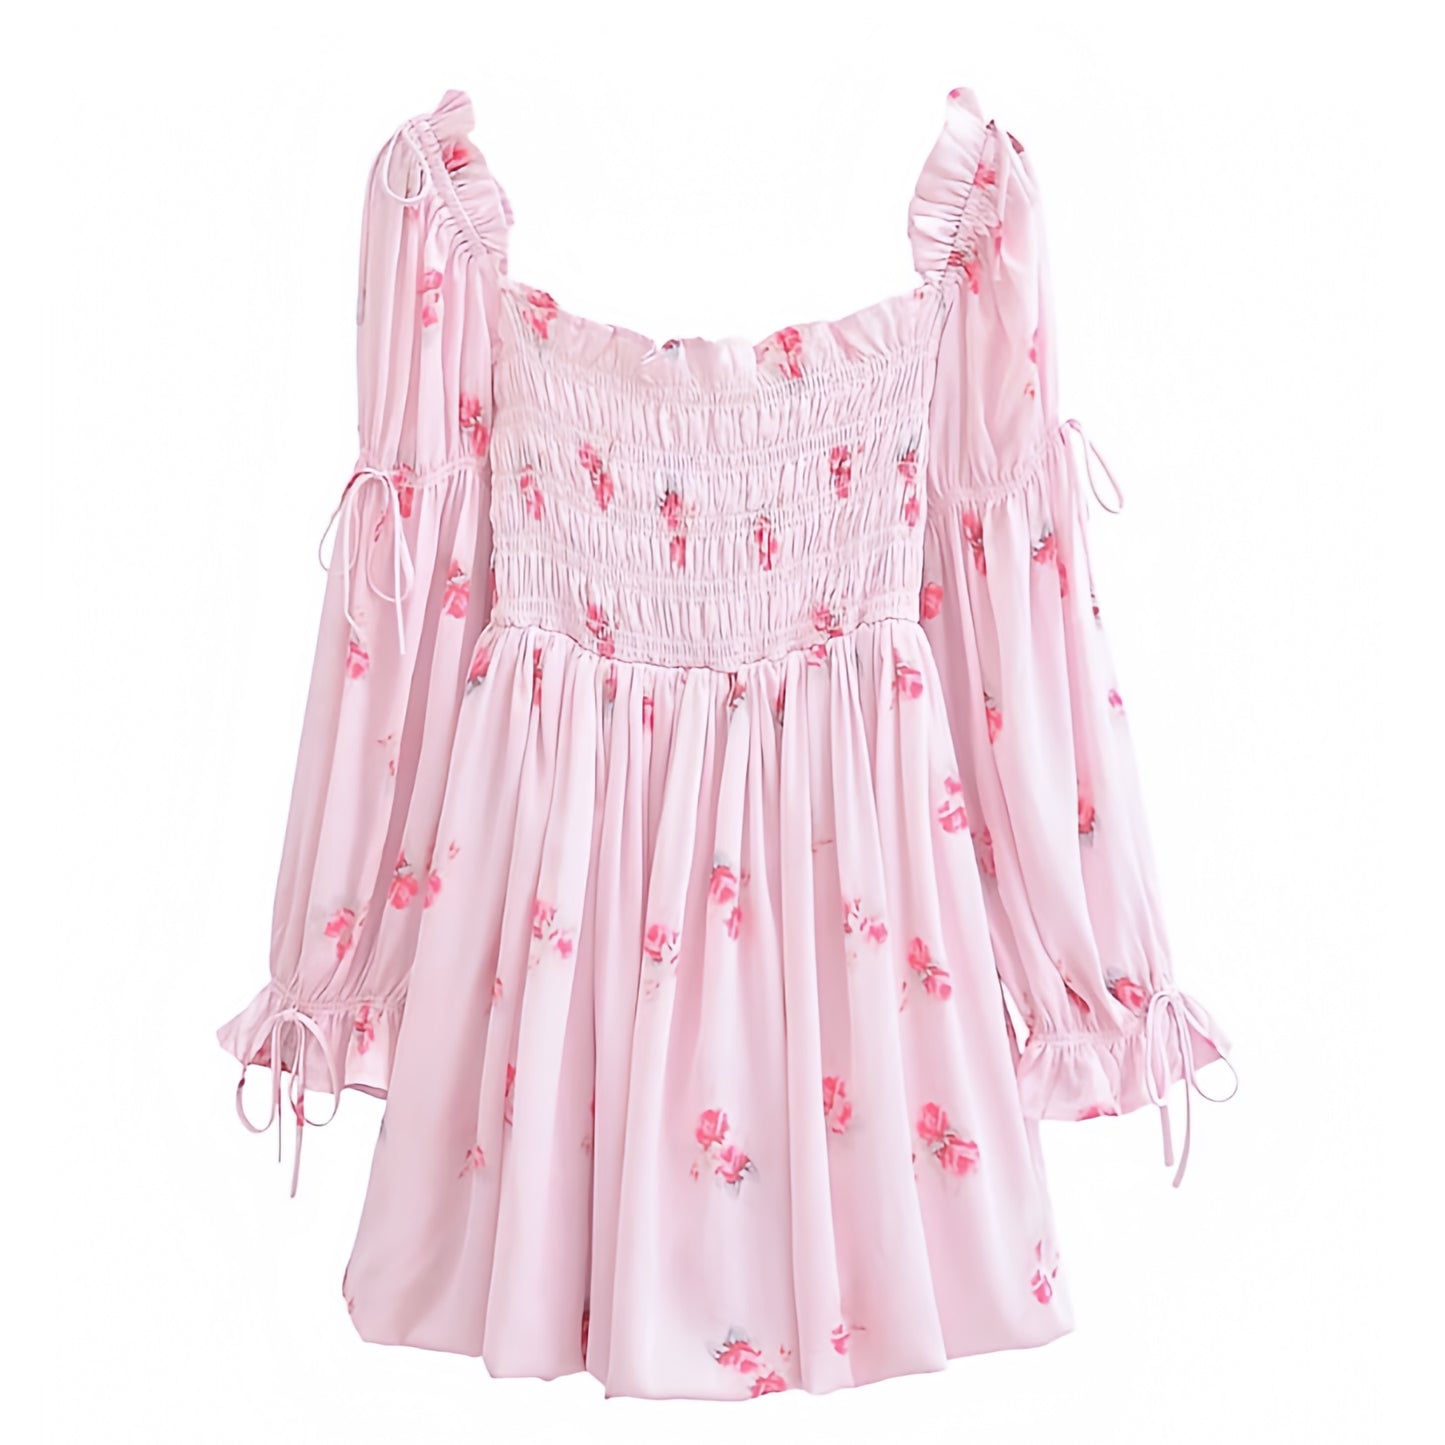 floral-print-light-pink-multi-color-flower-patterned-slim-smocked-bodycon-fitted-bodice-drop-waist-ruffle-trim-fit-and-flare-long-puff-sleeve-sweetheart-neckline-tiered-boho-bohemian-flowy-linen-short-mini-dress-gown-women-ladies-teens-tweens-chic-trendy-spring-2024-summer-elegant-casual-semi-formal-feminine-preppy-style-prom-homecoming-hoco-wedding-guest-party-graduation-beach-vacation-sundress-dresses-altard-state-loveshackfancy-revolve-lulus-hello-molly-dupe